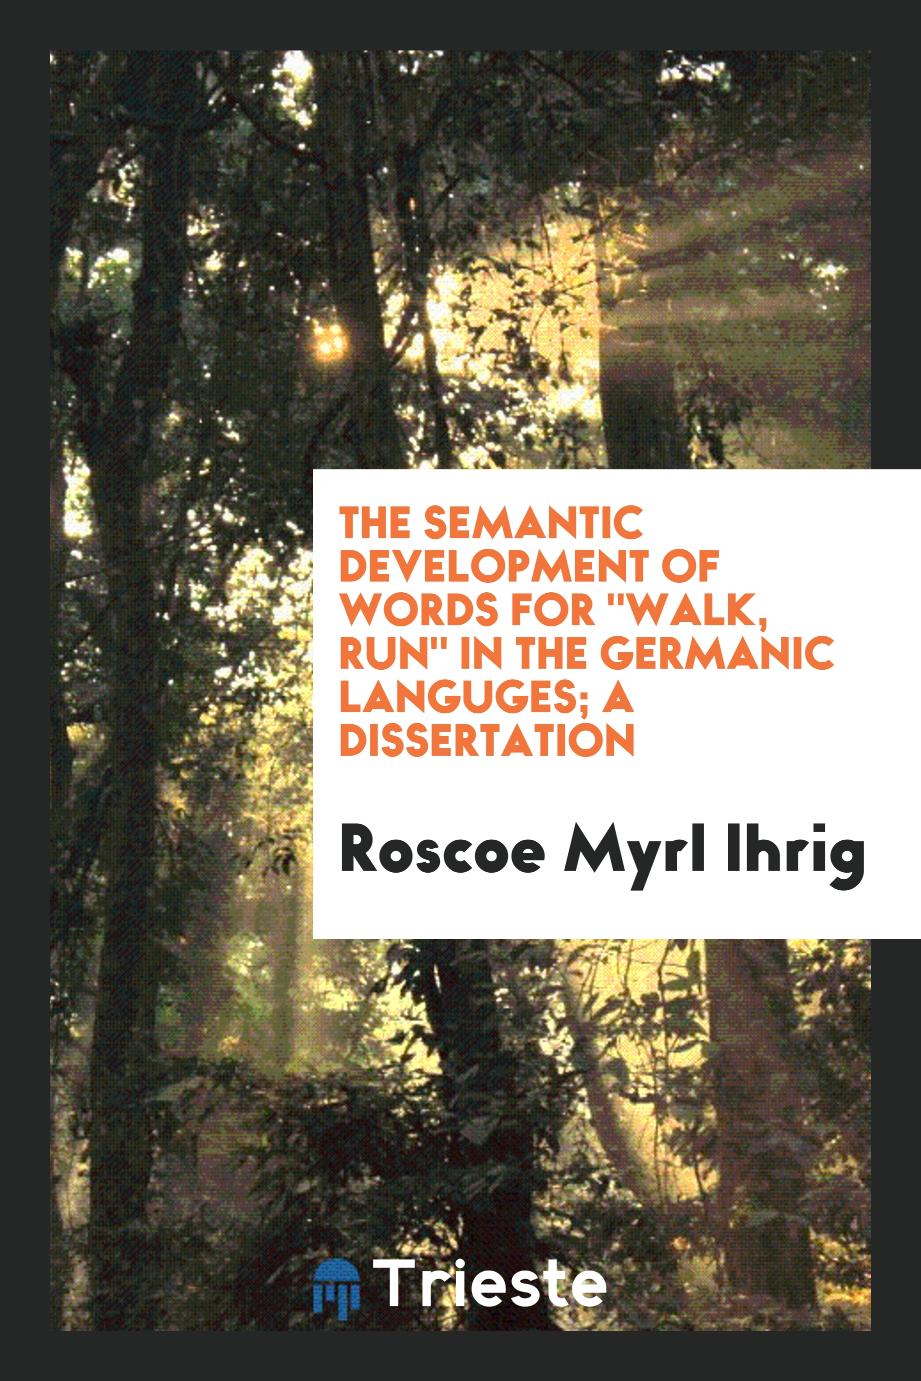 The Semantic Development of Words for "Walk, Run" in the Germanic Languges; A Dissertation